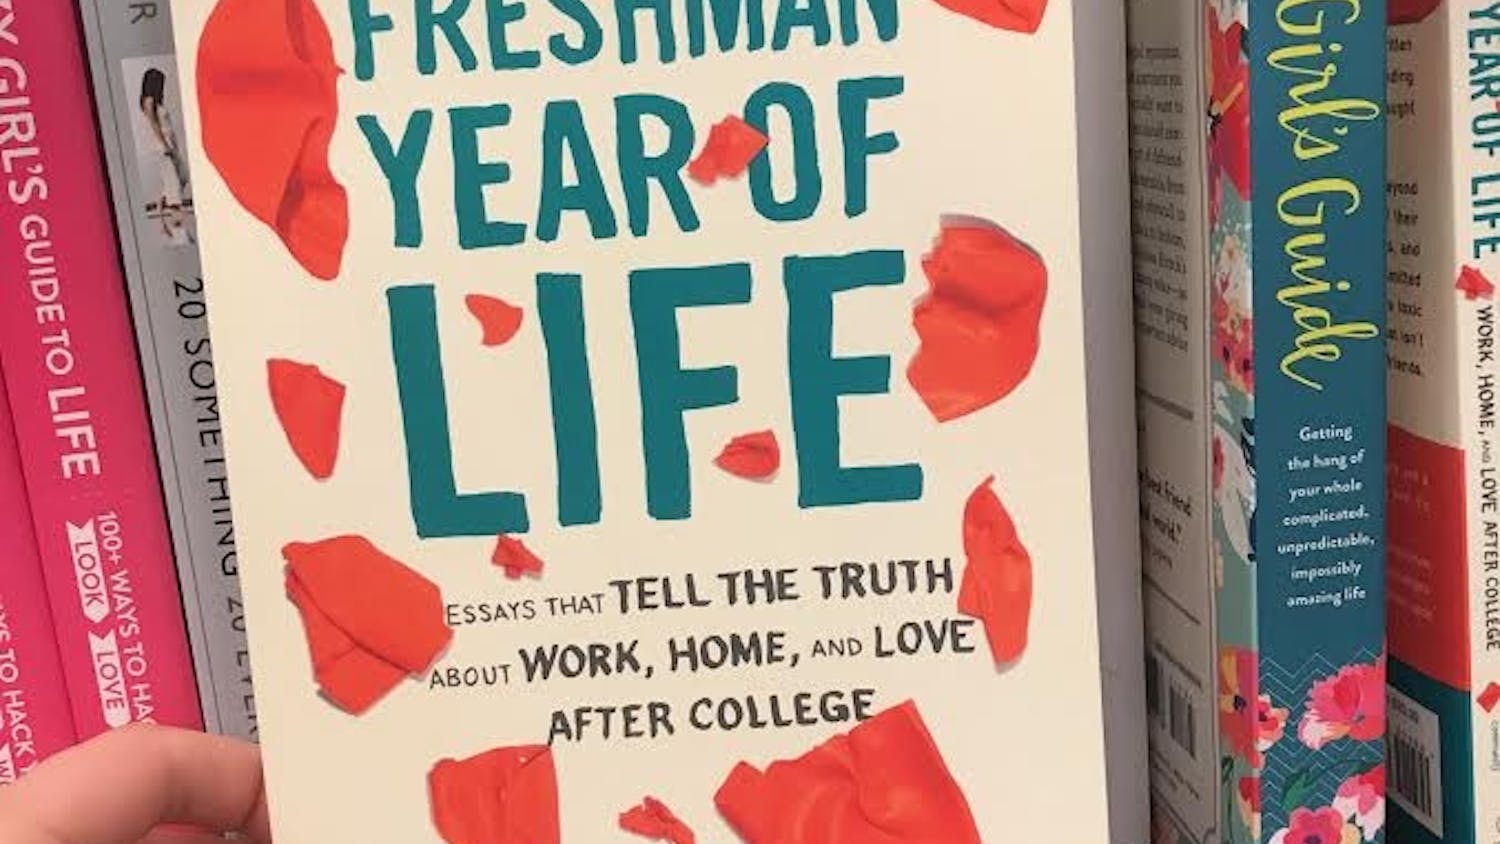 "Freshman Year of Life" by MindSumo was originally published Apr. 11, 2017. The book features "essays that tell the truth about work, home and love after college".&nbsp;